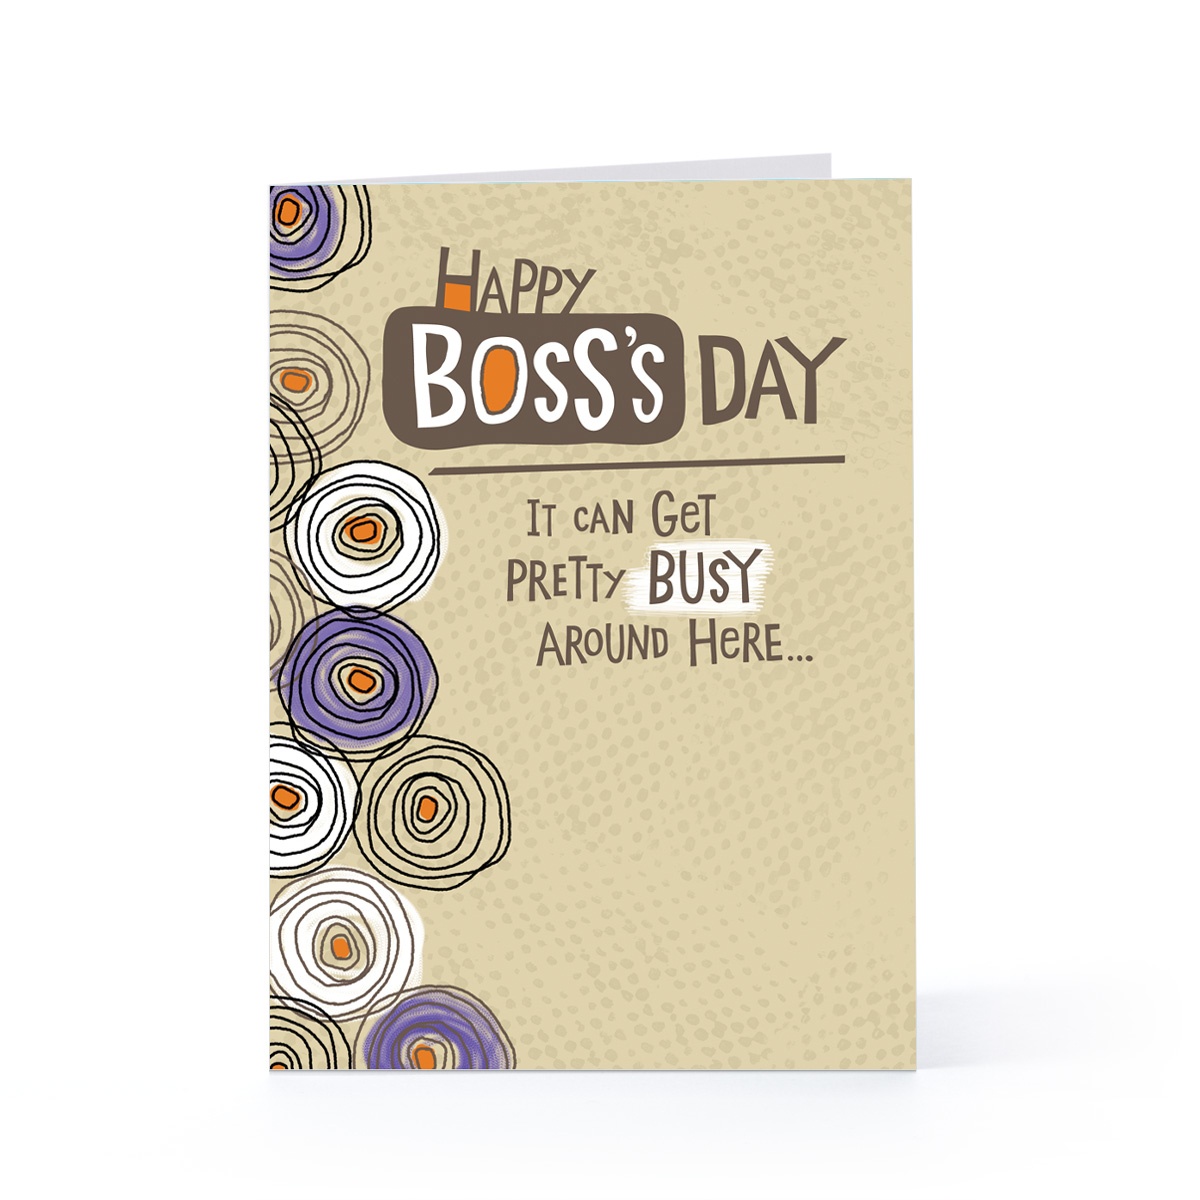 Free Card: Free Card For National Bosses Day - Free Printable Boss&amp;amp;#039;s Day Cards